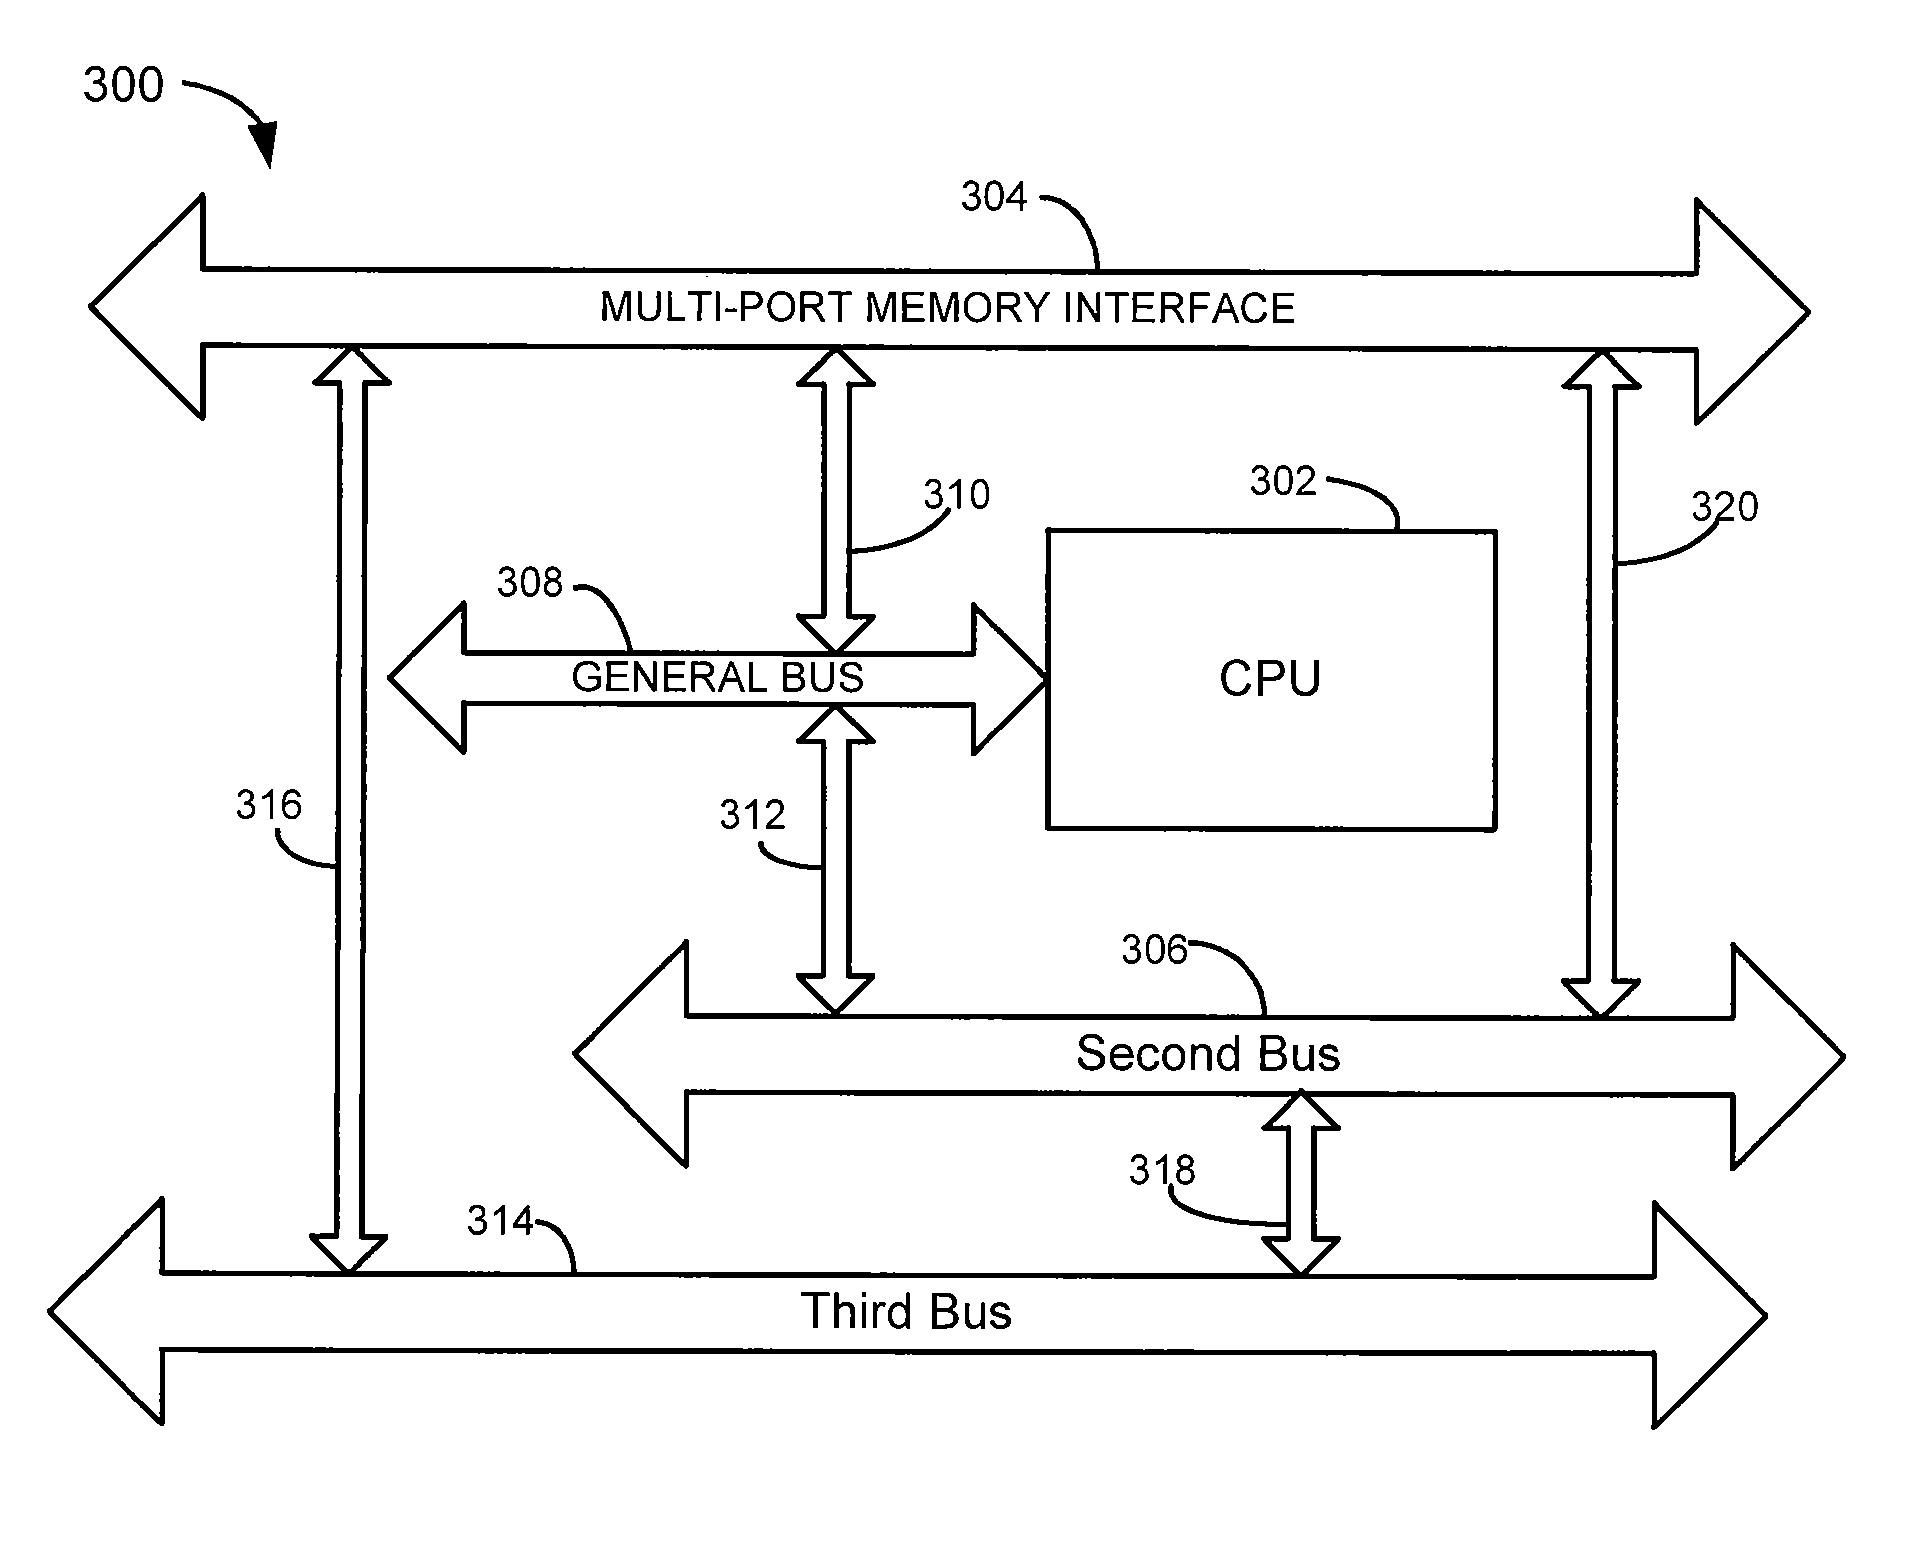 Multi-port processor architecture with bidirectional interfaces between busses